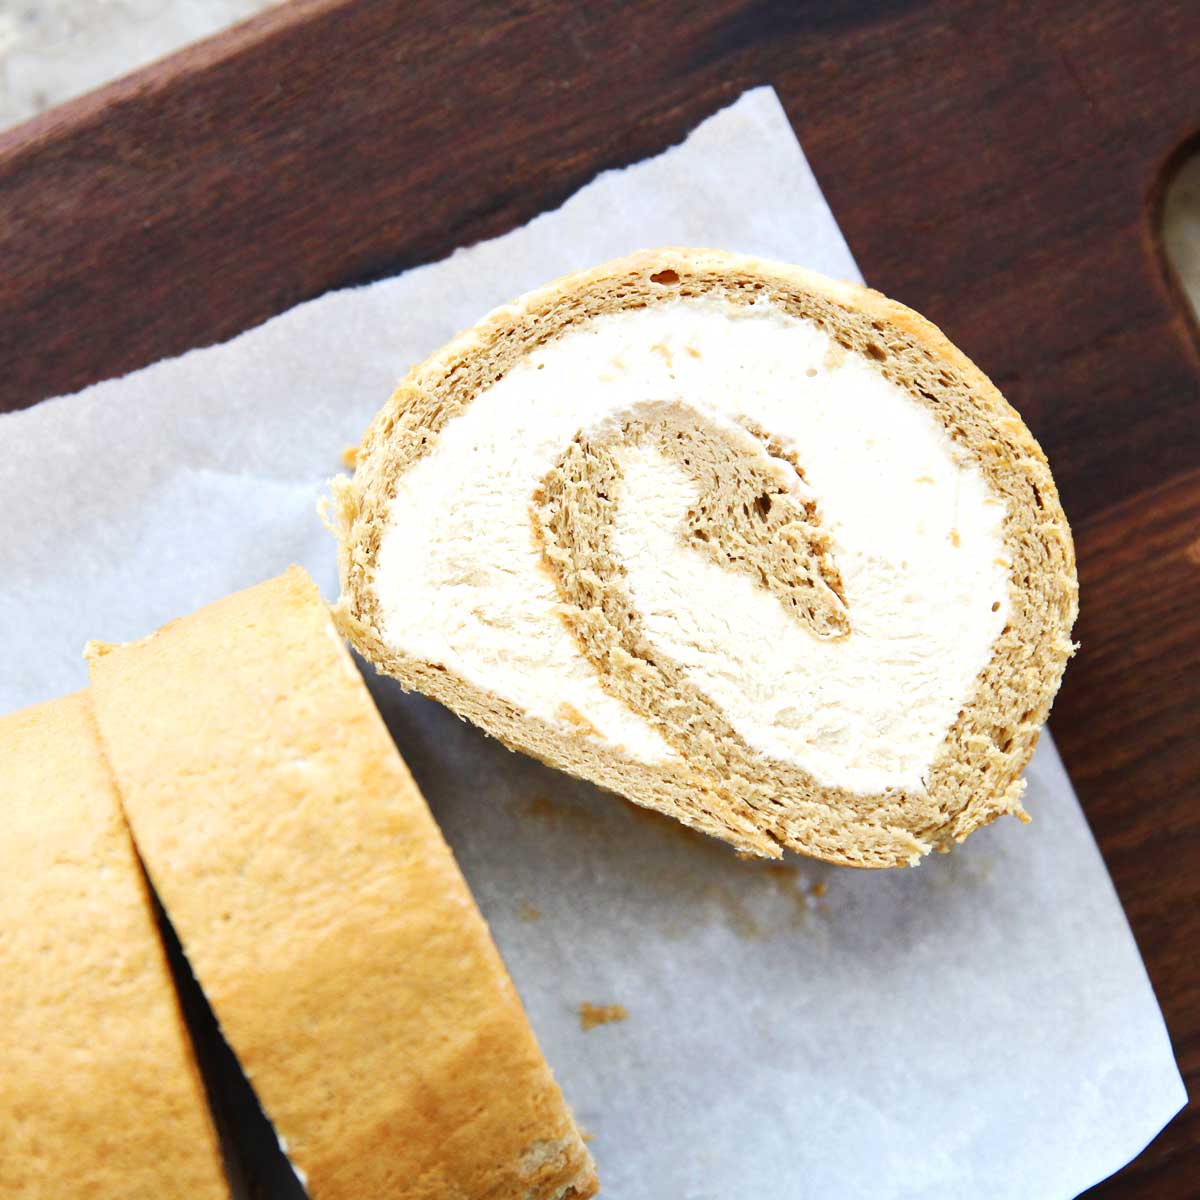 The Best Coffee Roll Cake You'll Ever Make (With a Secret Ingredient!) - Coffee Roll Cake